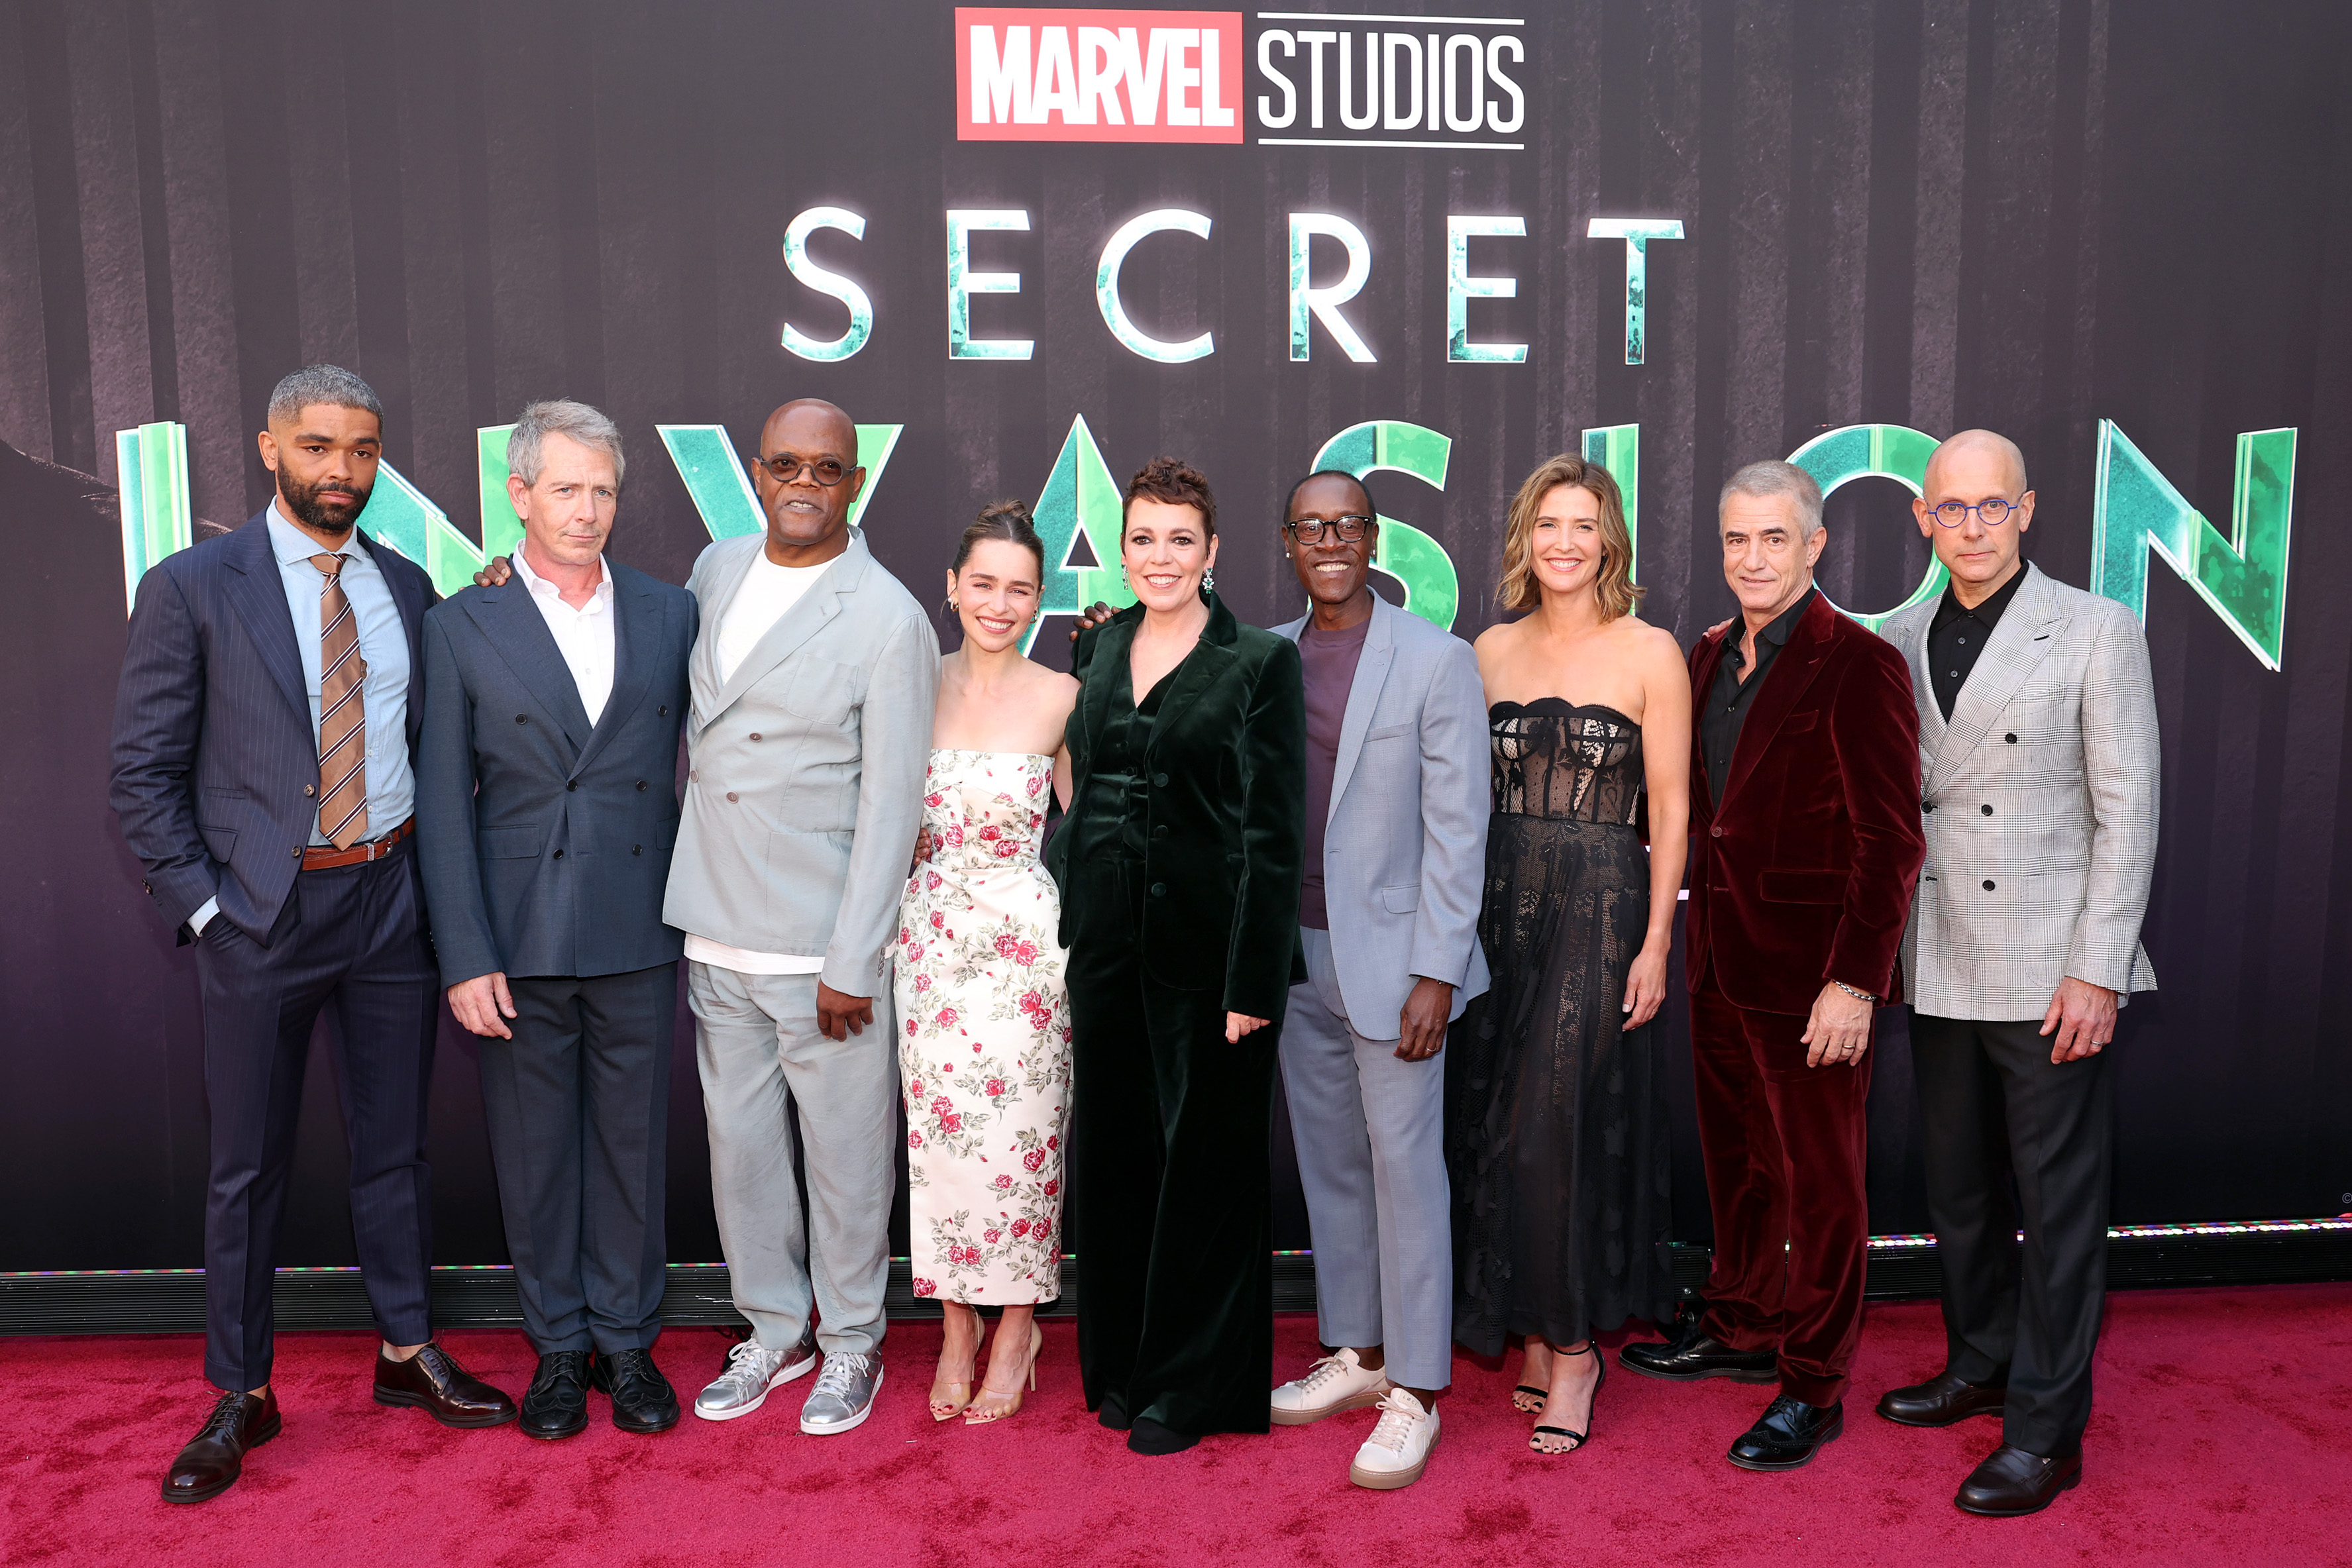 Secret Invasion Release Date, Cast, Trailer, and Story